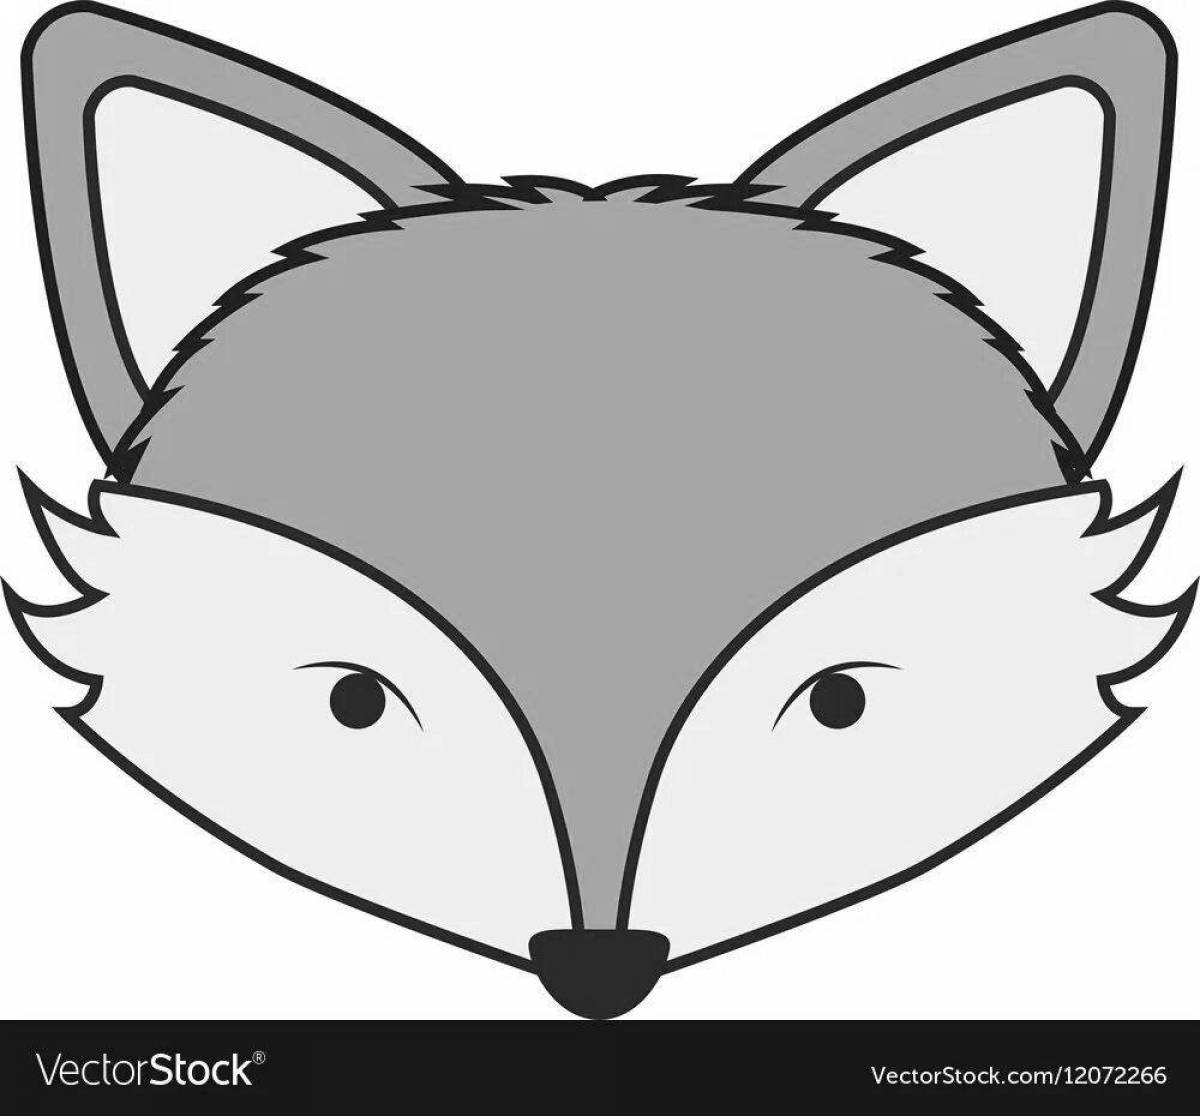 Funny fox coloring page